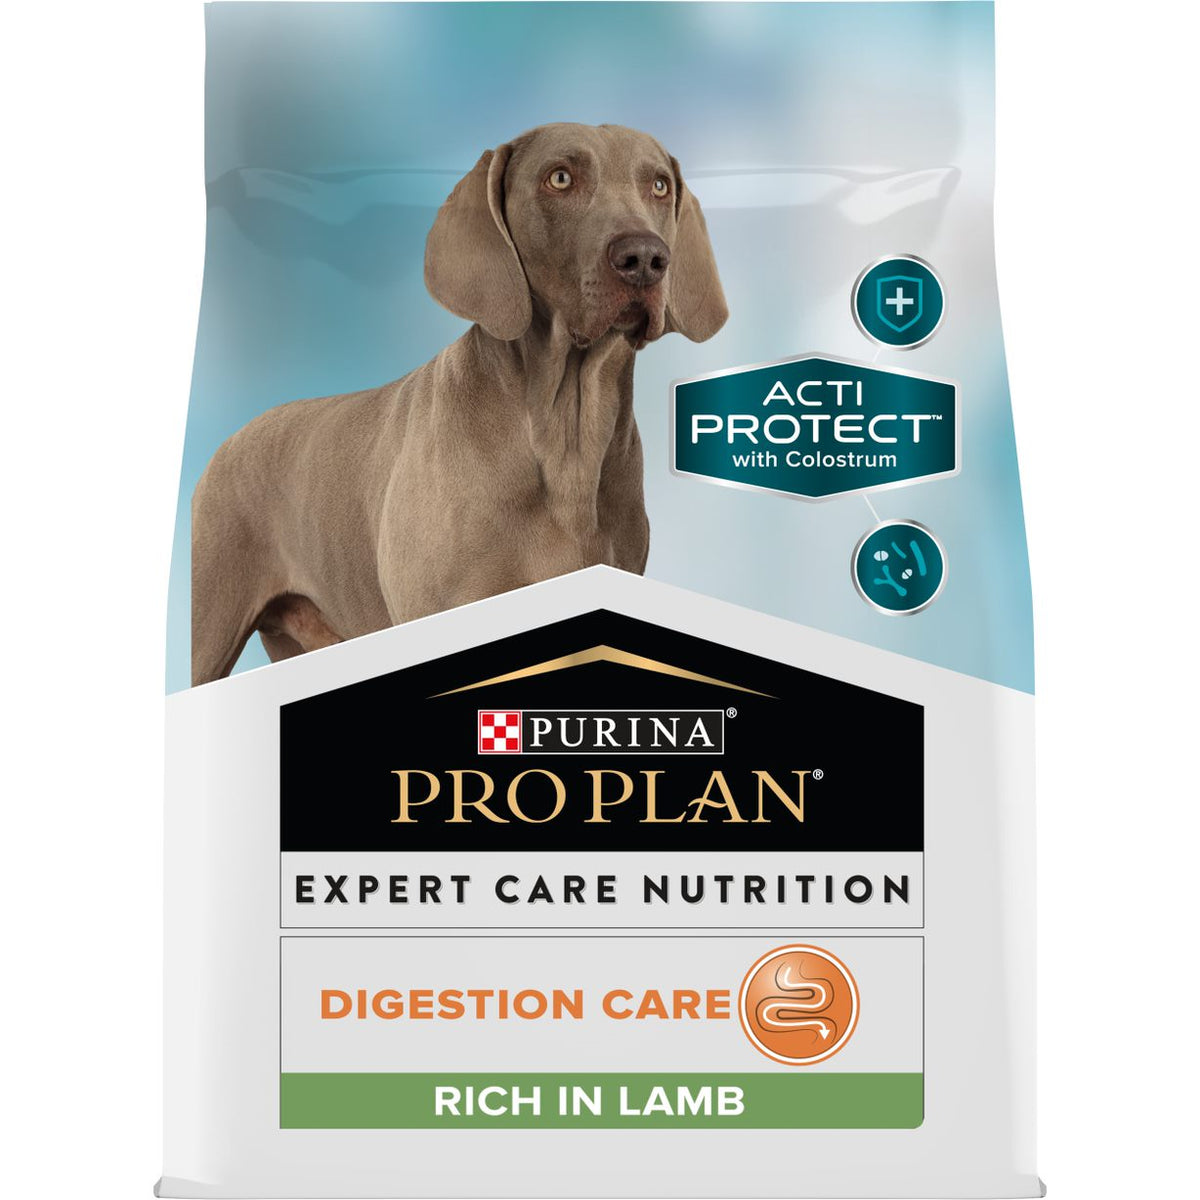 PURINA® PRO PLAN® Expert Care Nutrition - Canine Adult Digestion Care - Lamb 3kg